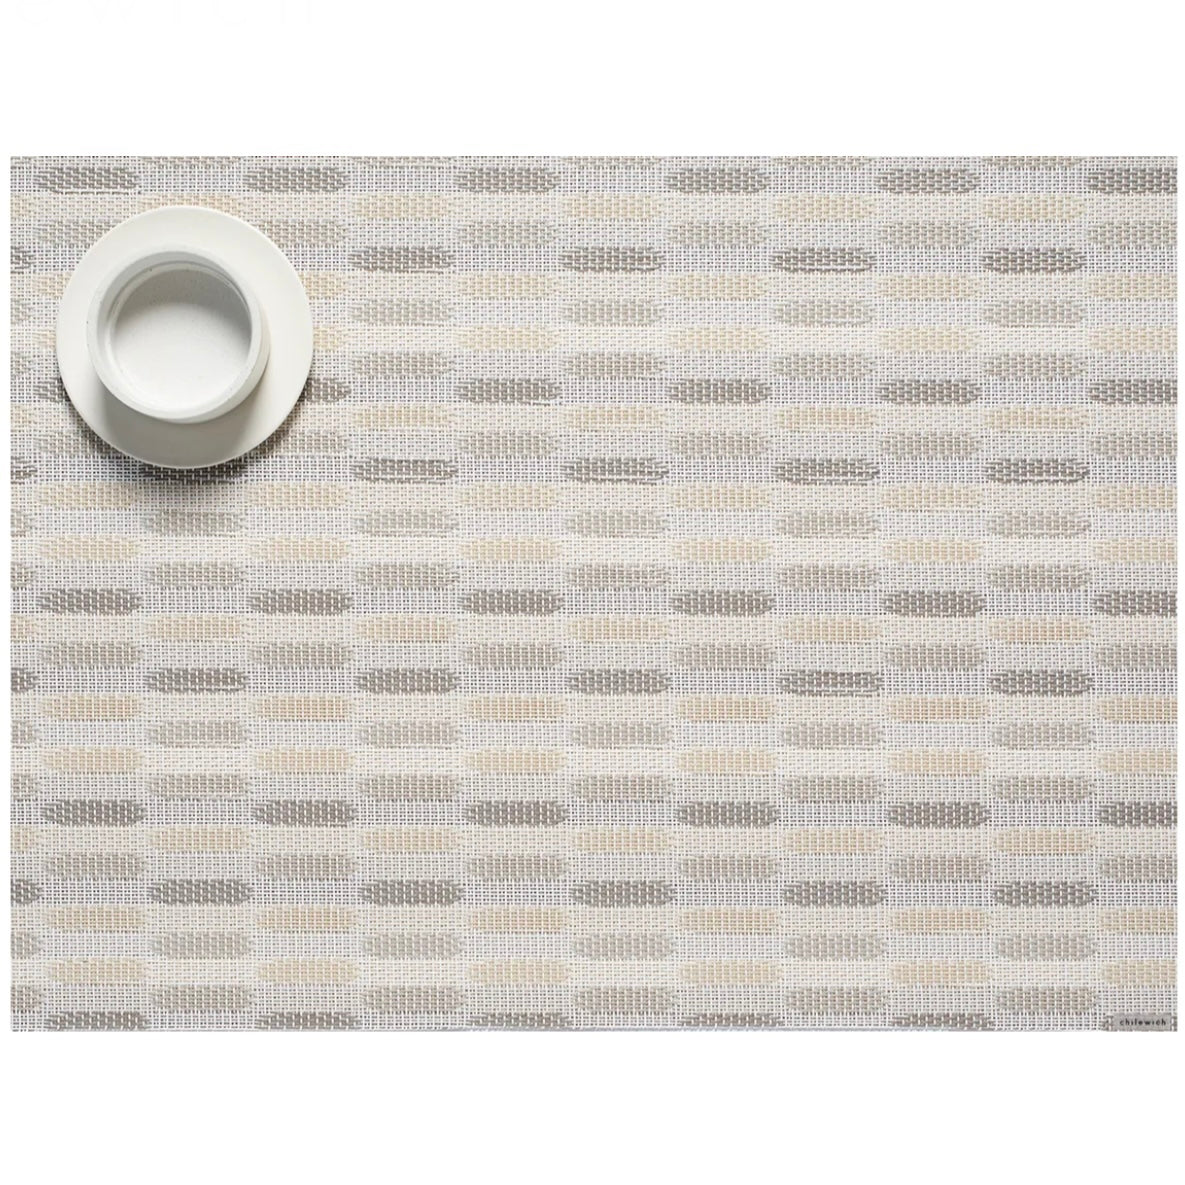 Pebble River Placemat by Chilewich